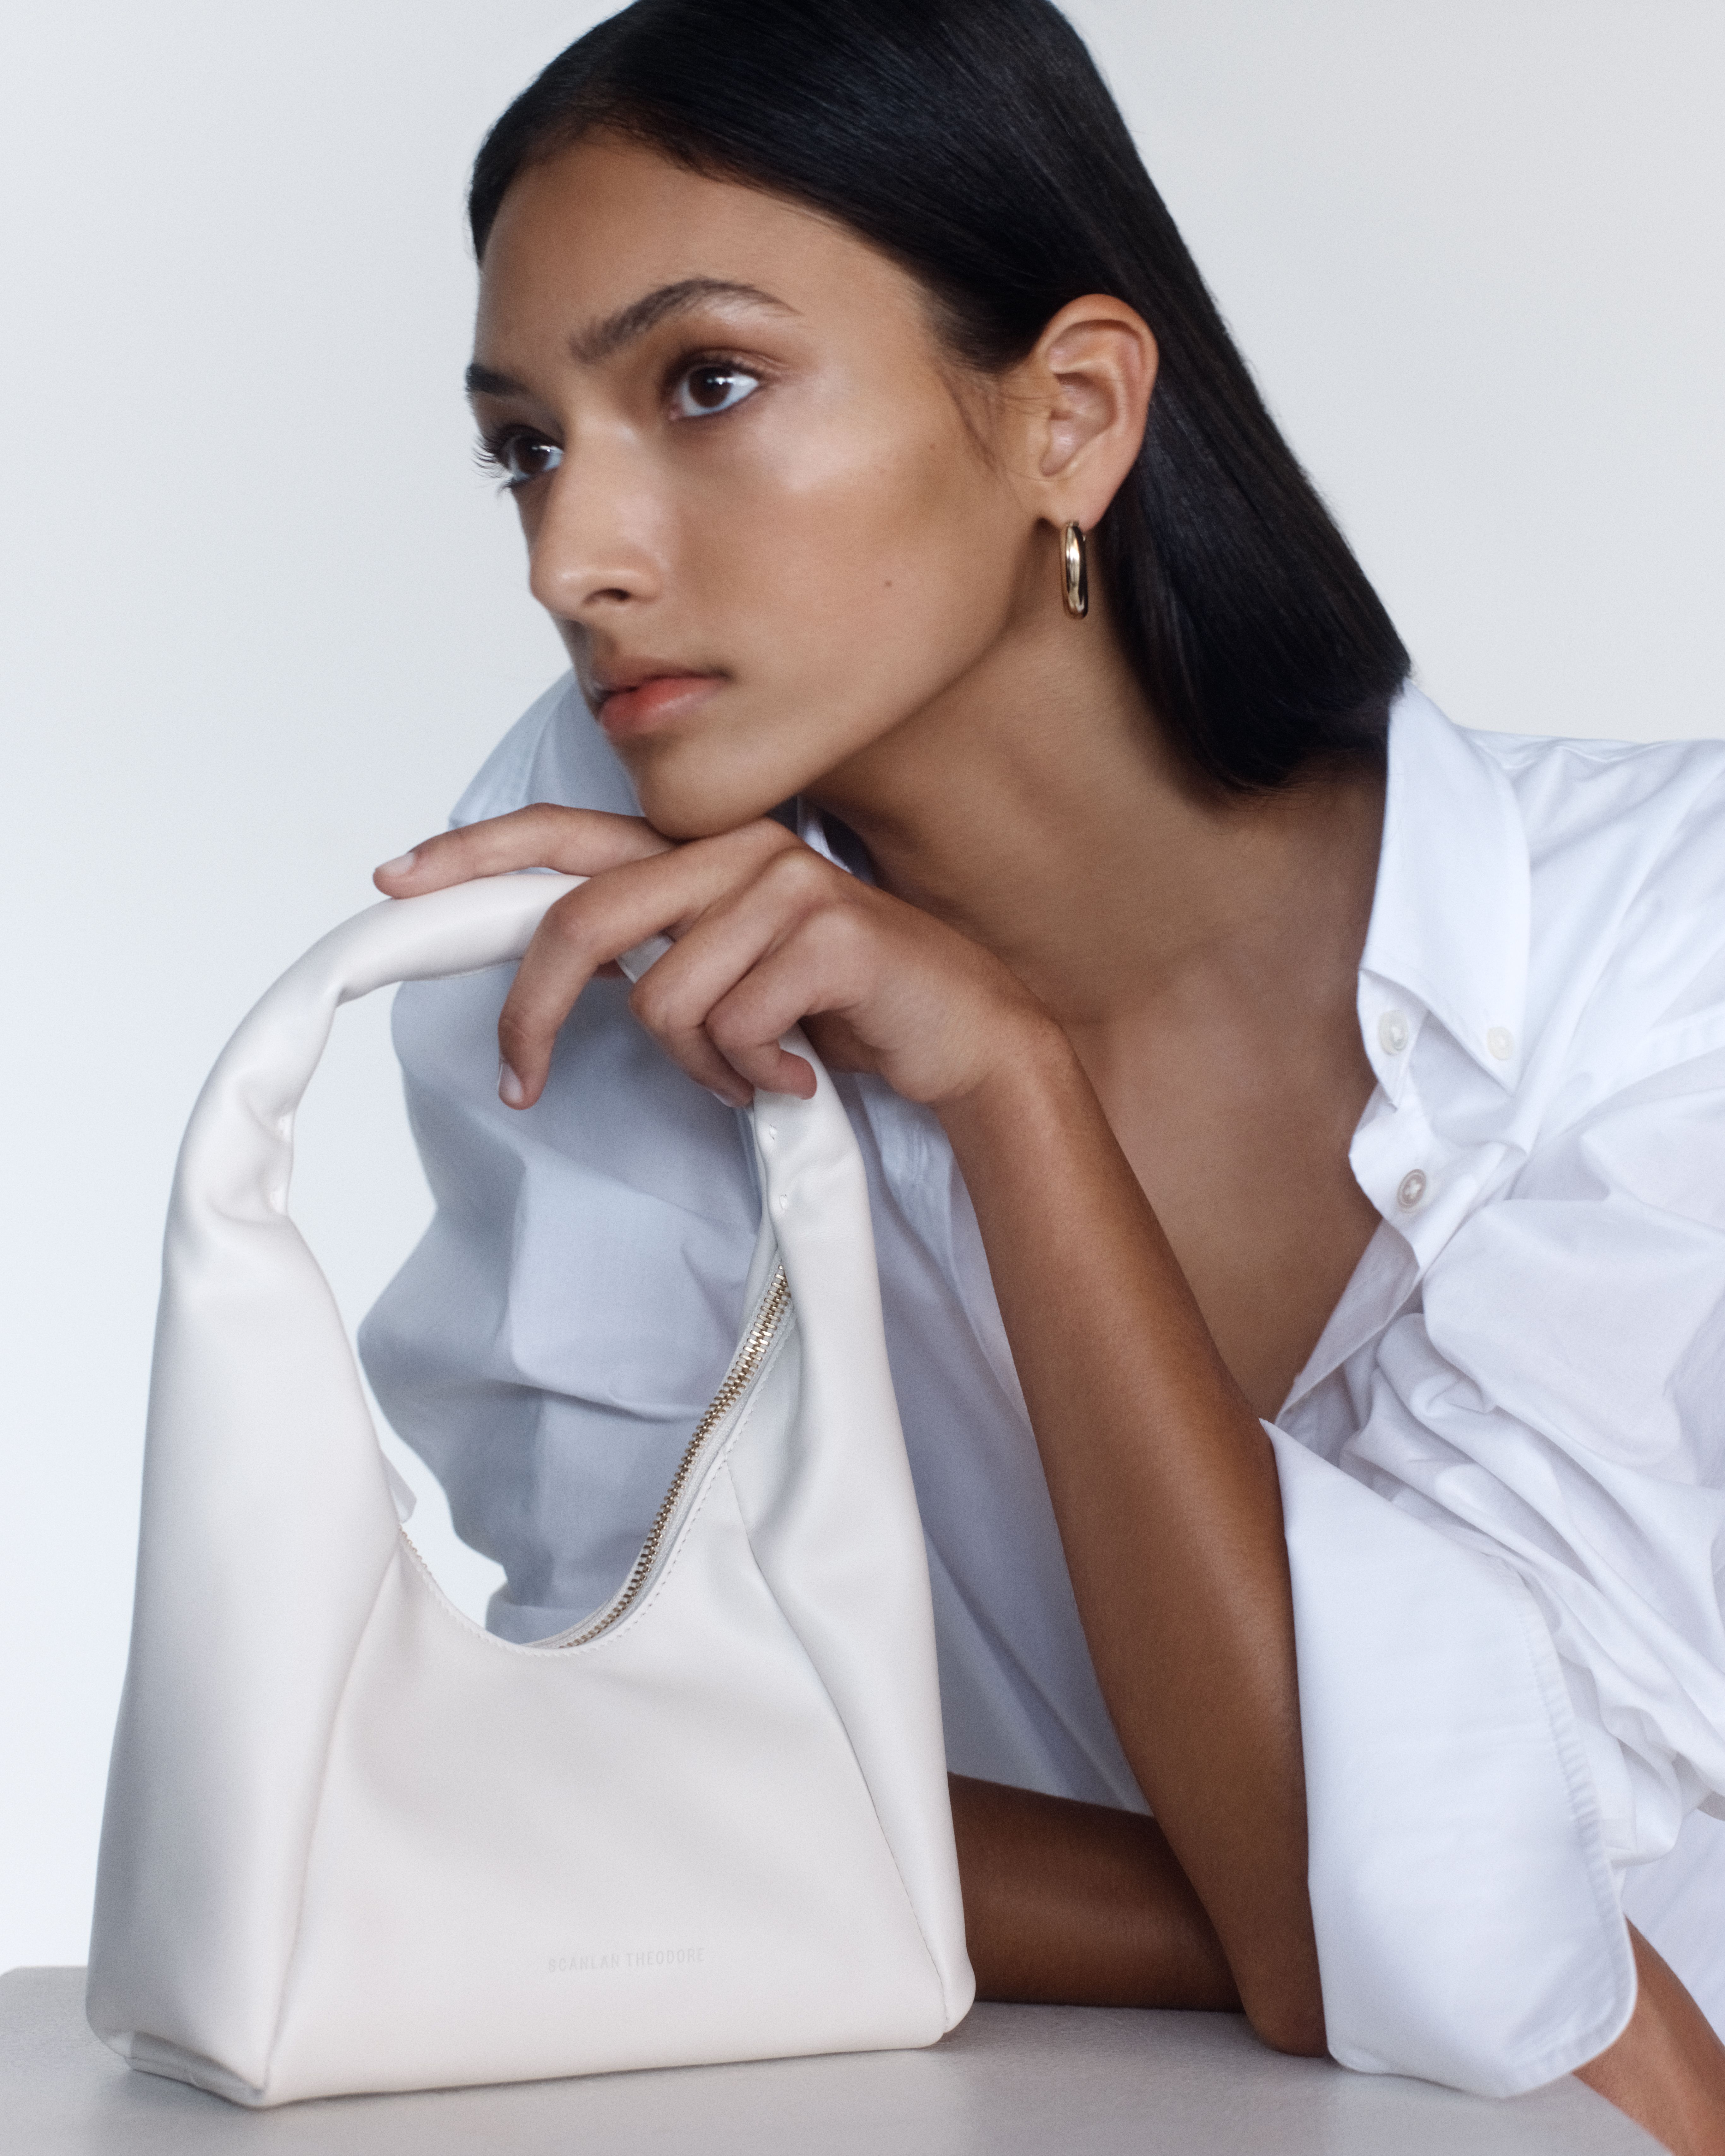 Model leaning on bench resting her hand and chin on a small white leather bag